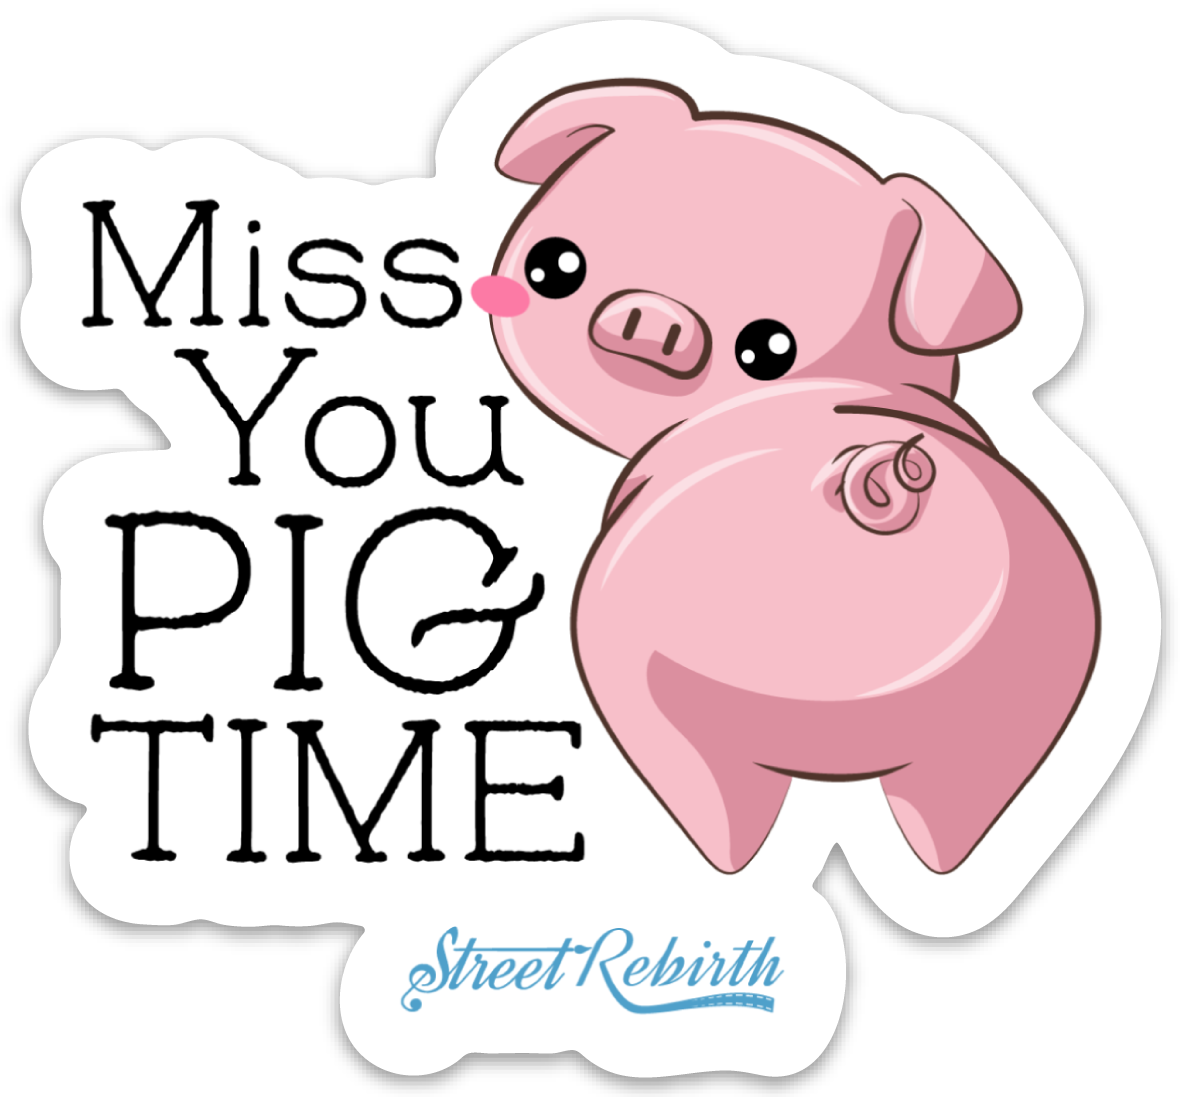 MISS YOU PIG TIME PUN STICKER – ONE 4 INCH WATER PROOF VINYL STICKER – FOR HYDRO FLASK, SKATEBOARD, LAPTOP, PLANNER, CAR, COLLECTING, GIFTING